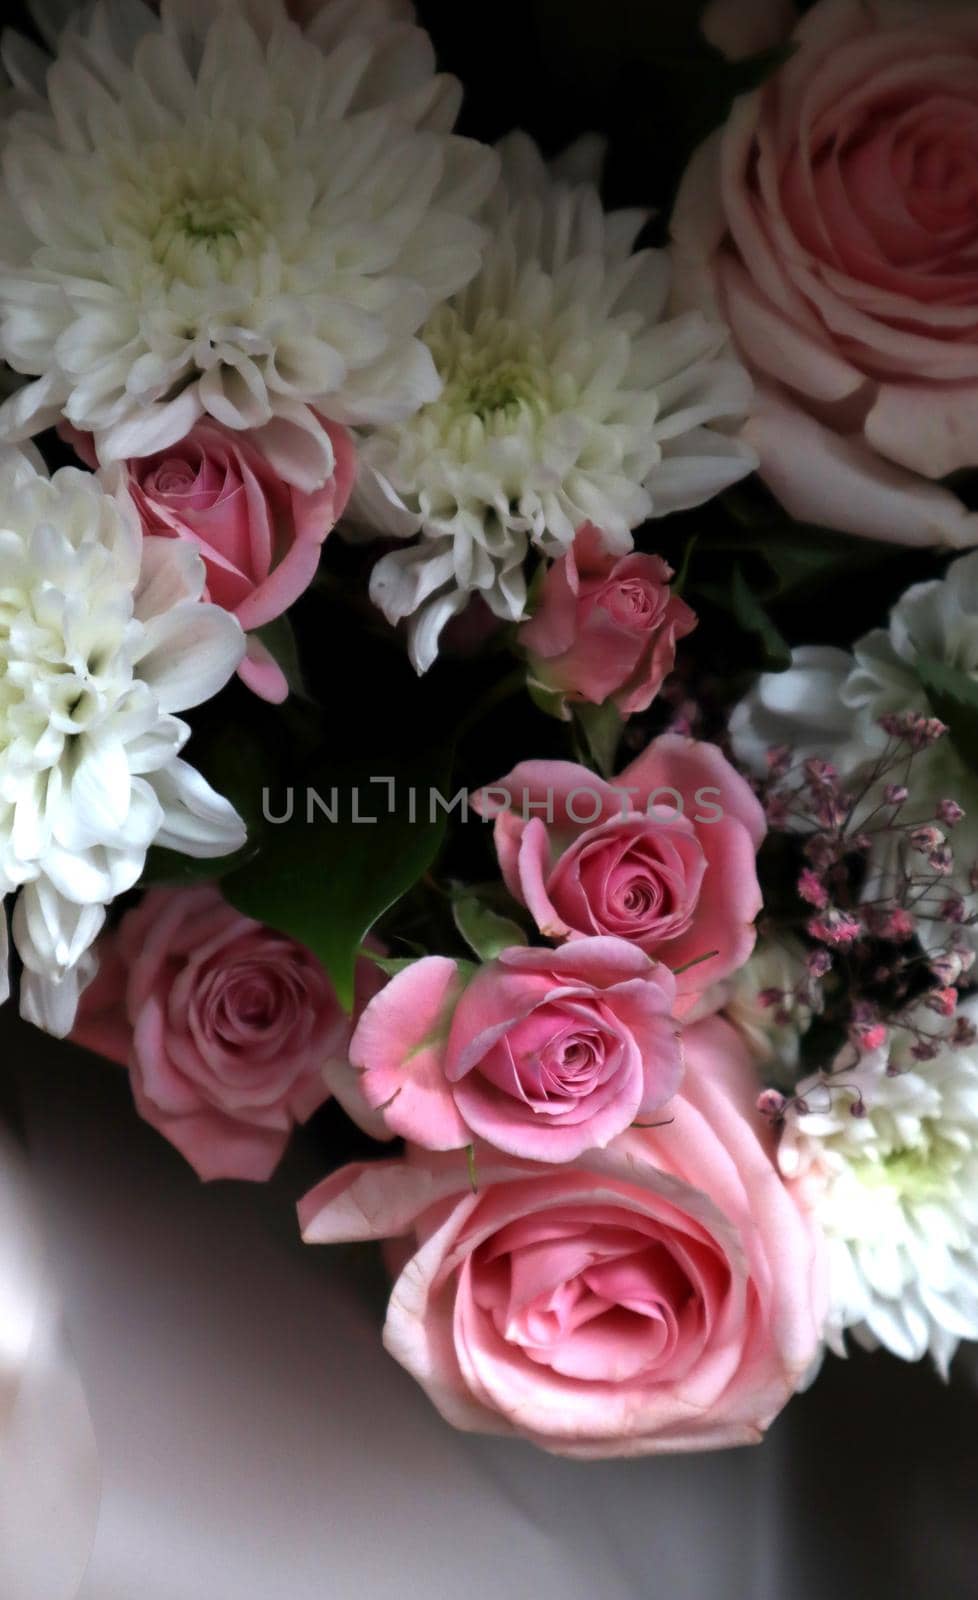 Bouquet of pink roses and white chrysanthemums